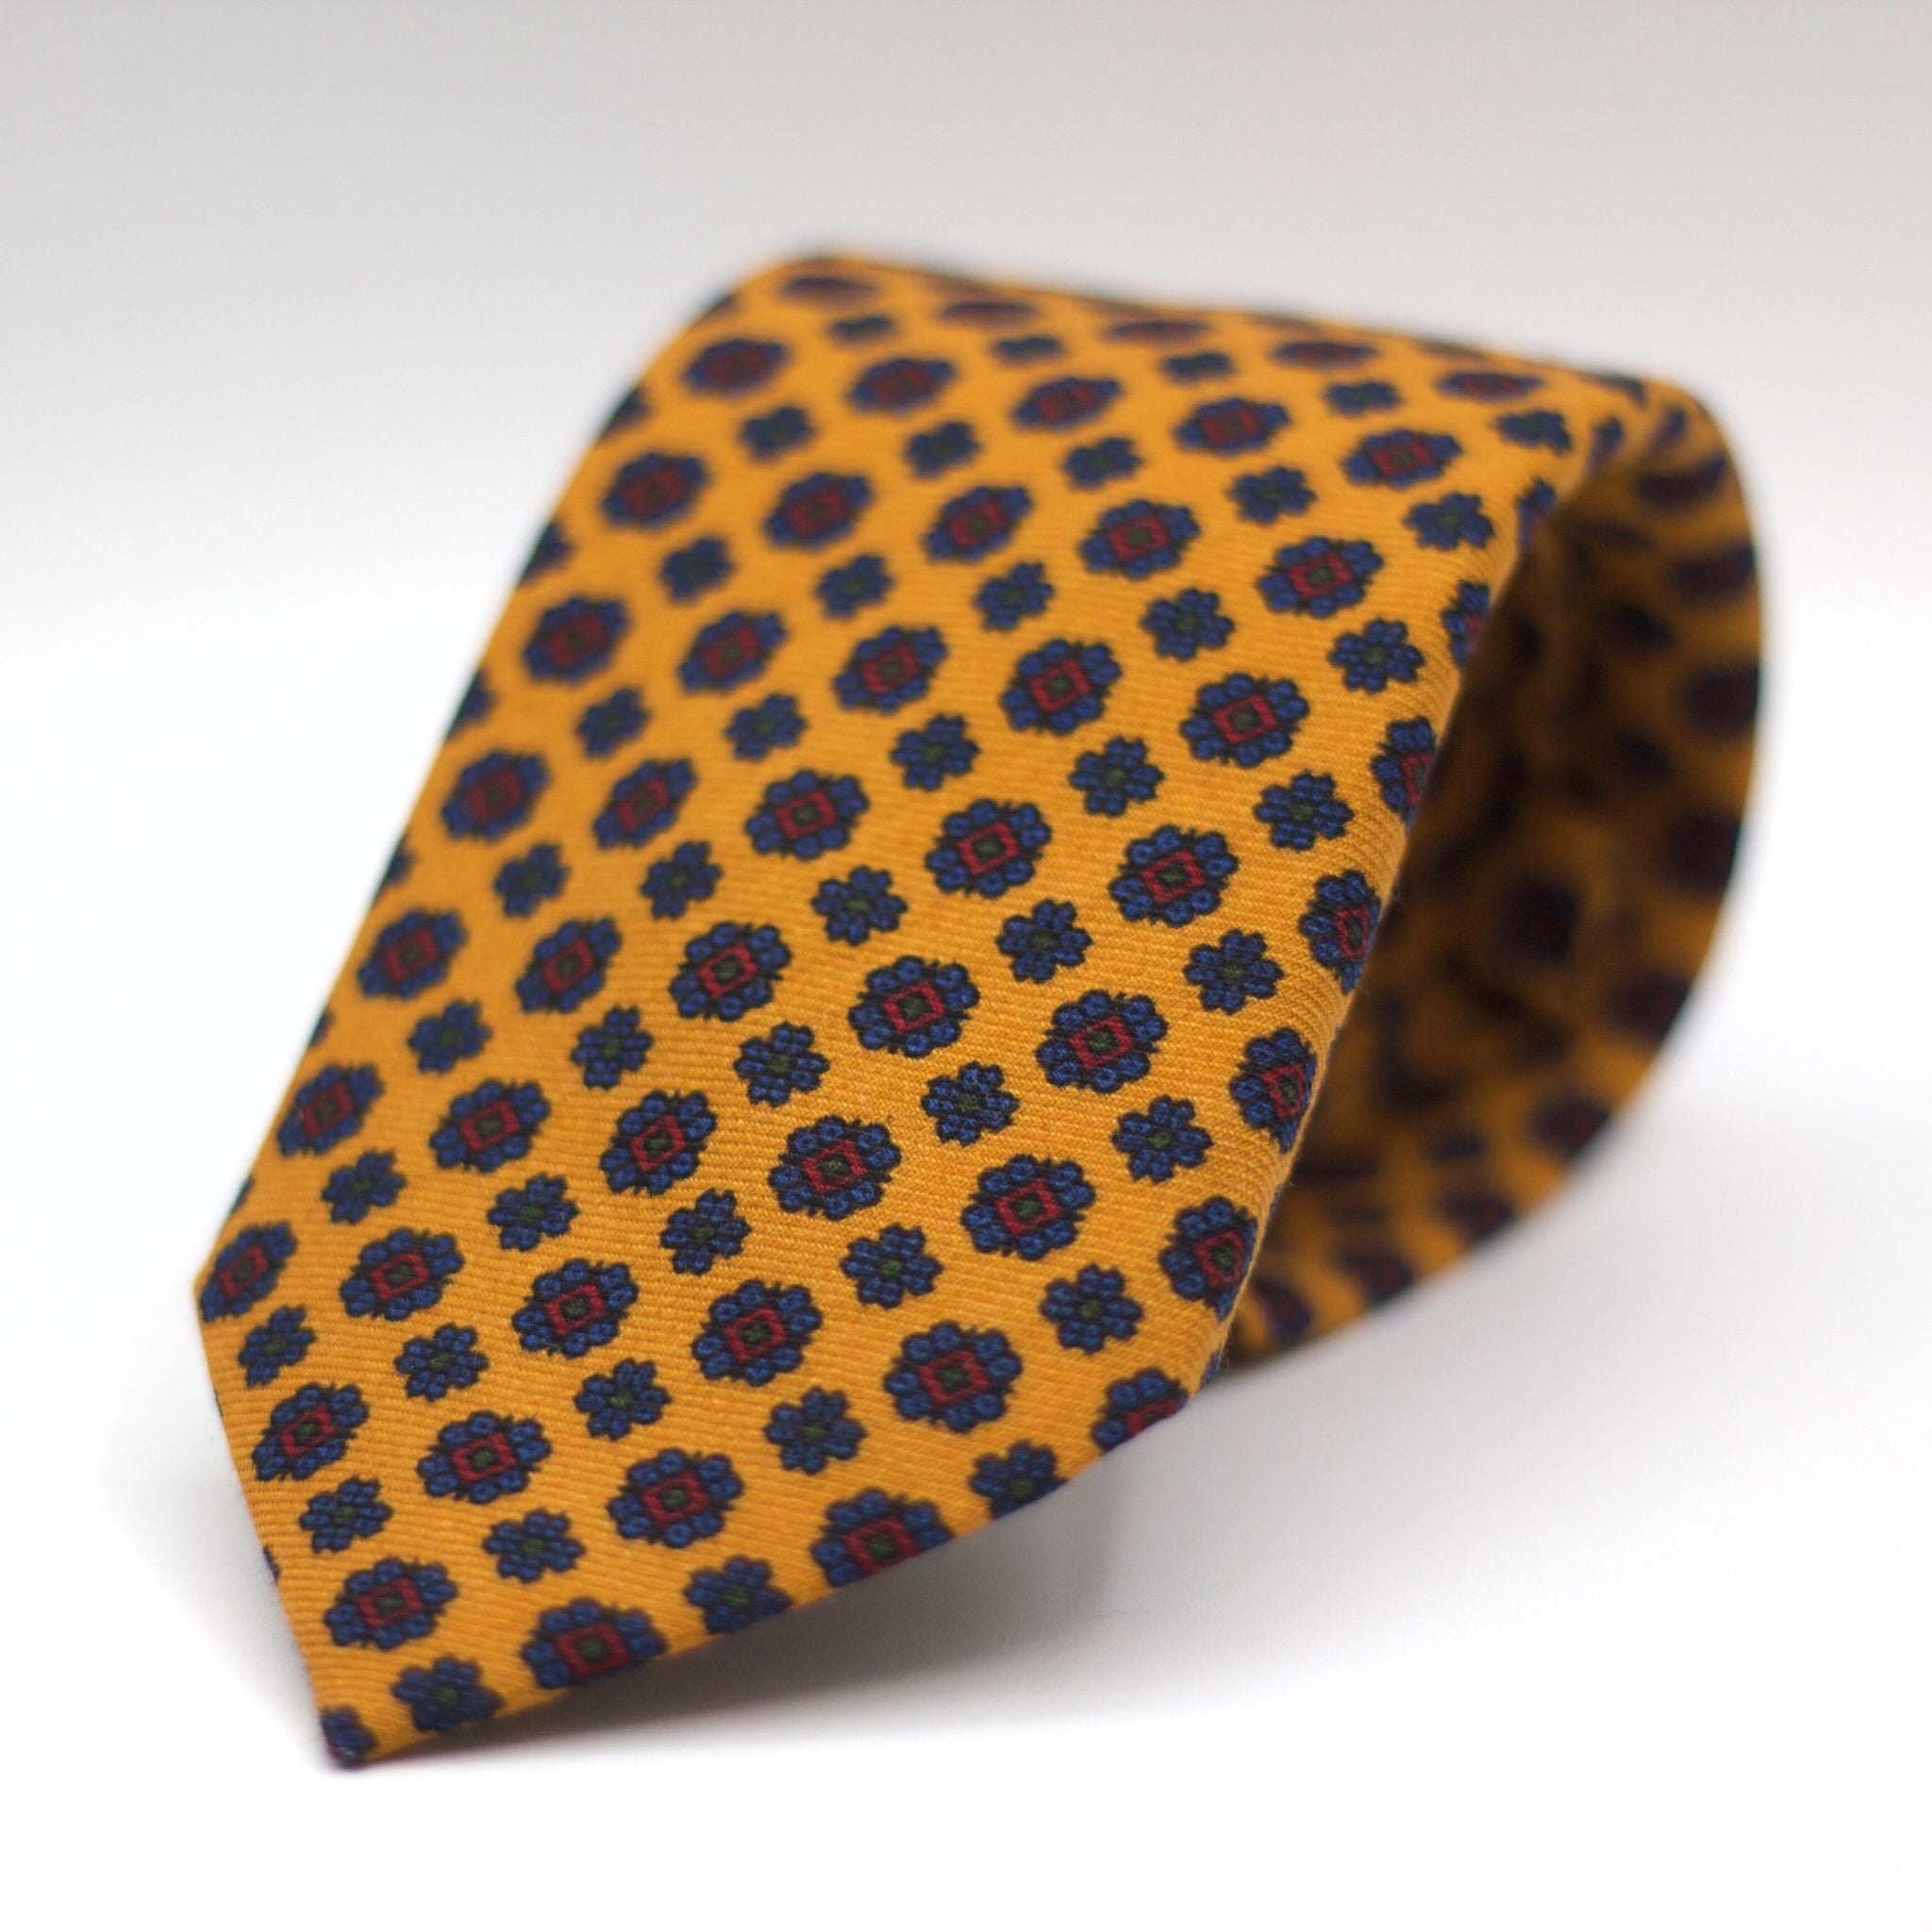 Holliday & Brown for Cruciani & Bella 100% Printed Wool  Tipped Orange, Blue and Burgundy Motif Tie Handmade in Italy 8 cm x 148 cm